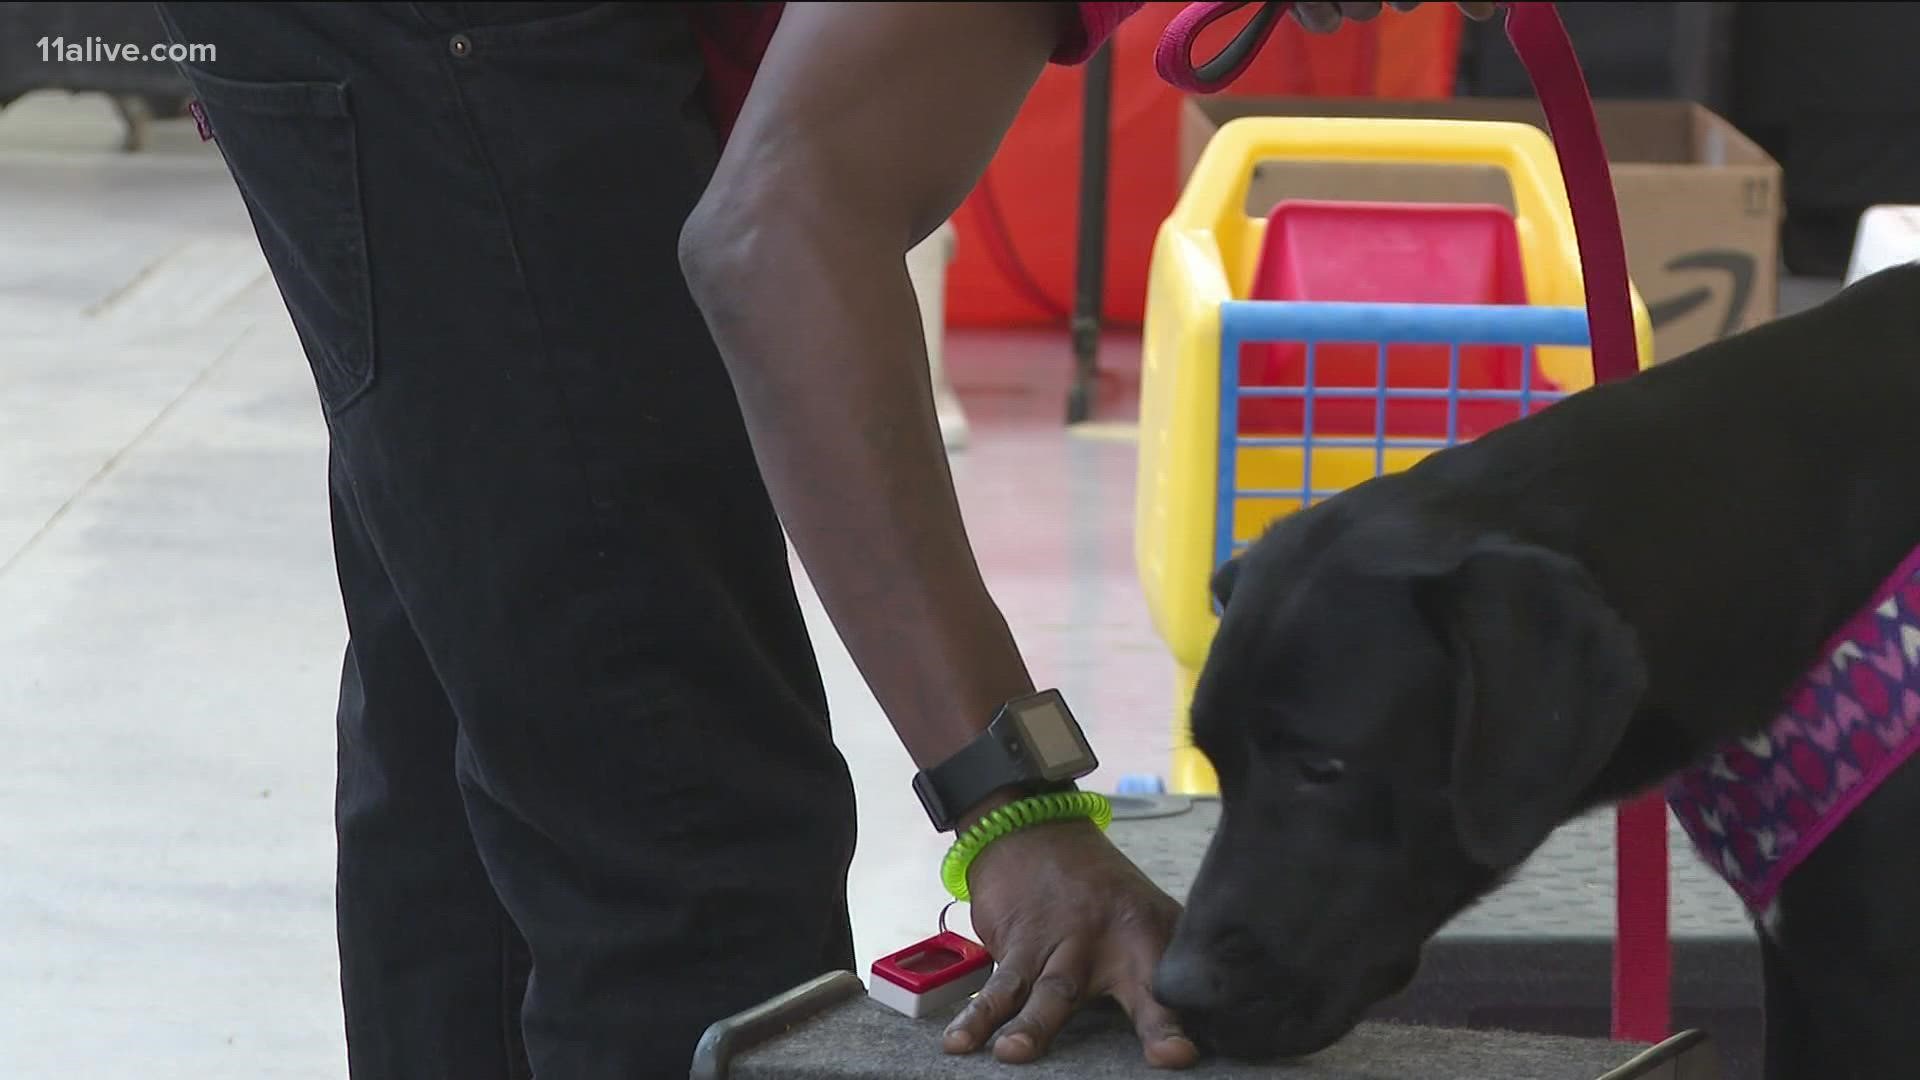 Canine Cellmates usually works with inmates to train dogs while they're behind bars, but this new program tries to reach the men before they get to jail.